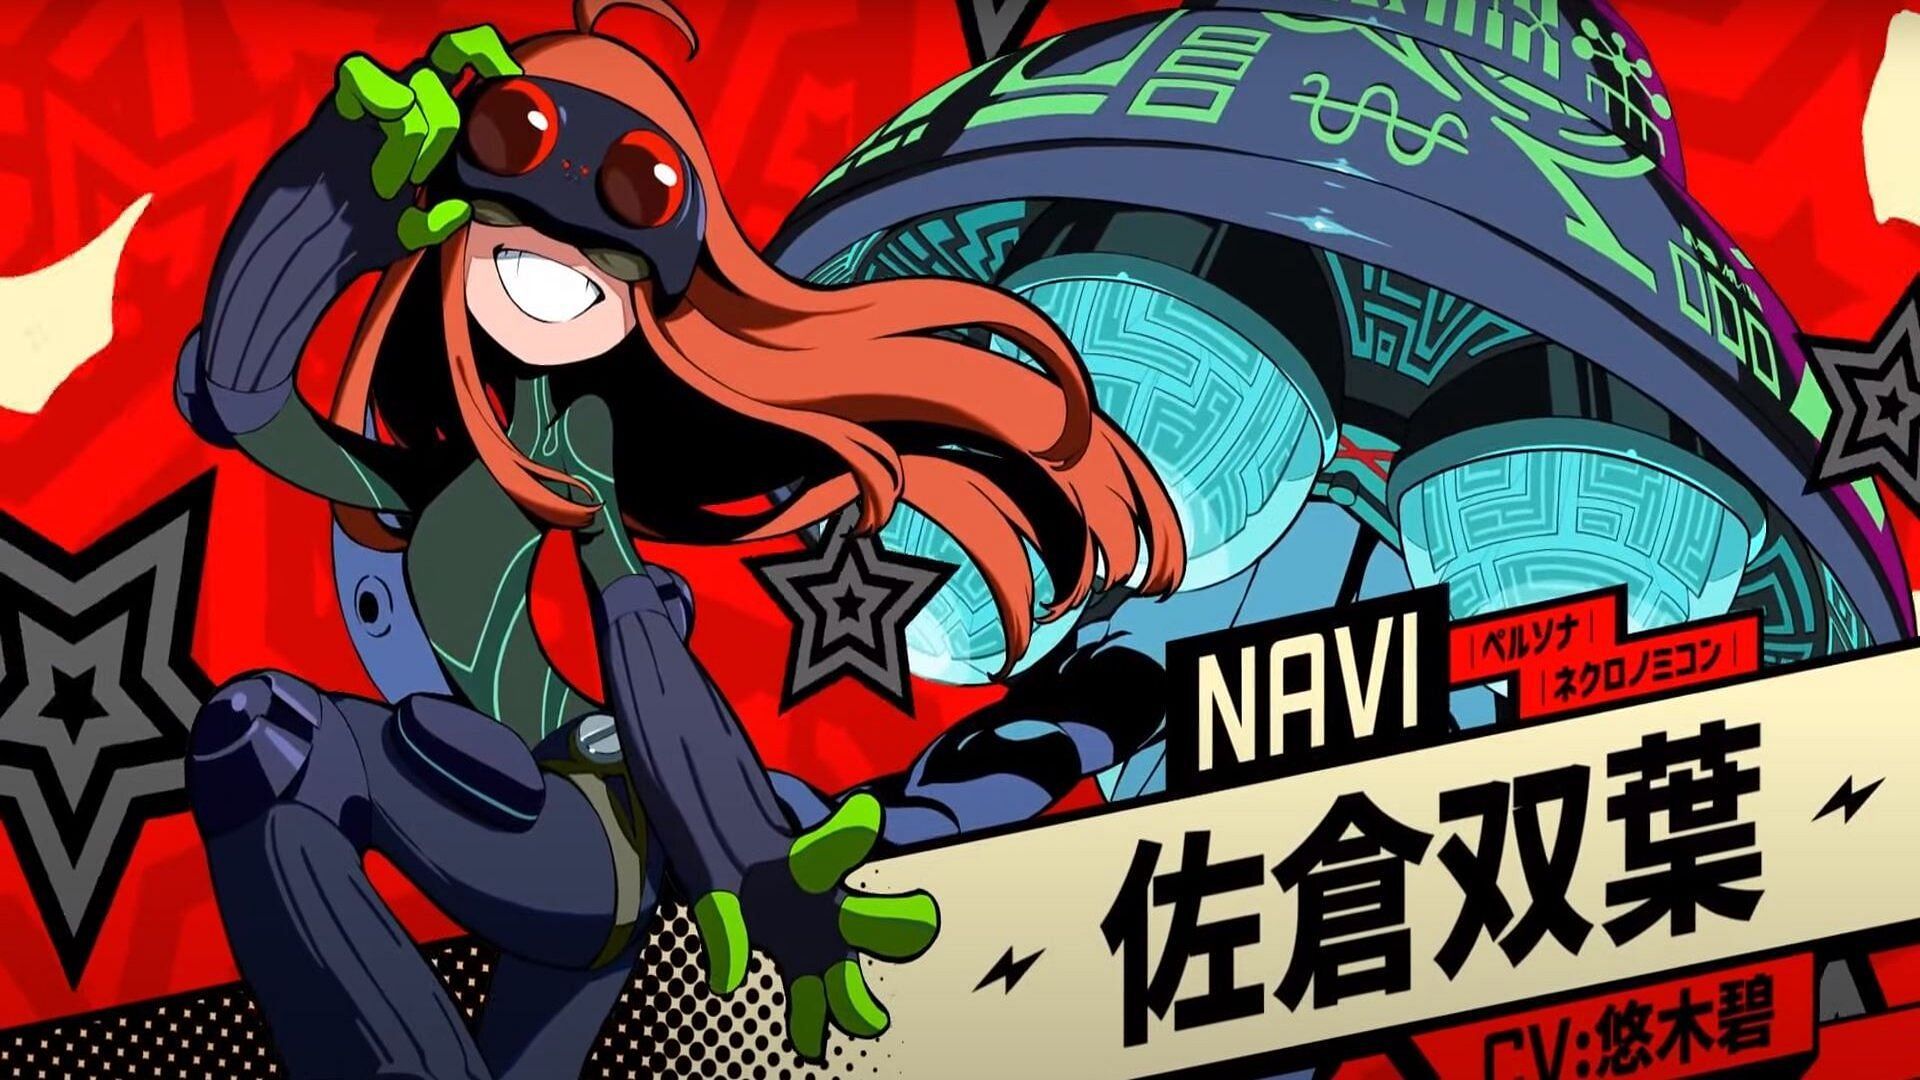 Futaba once again reprises her role as the navigator in Persona 5 Tactica (Image via Atlus)